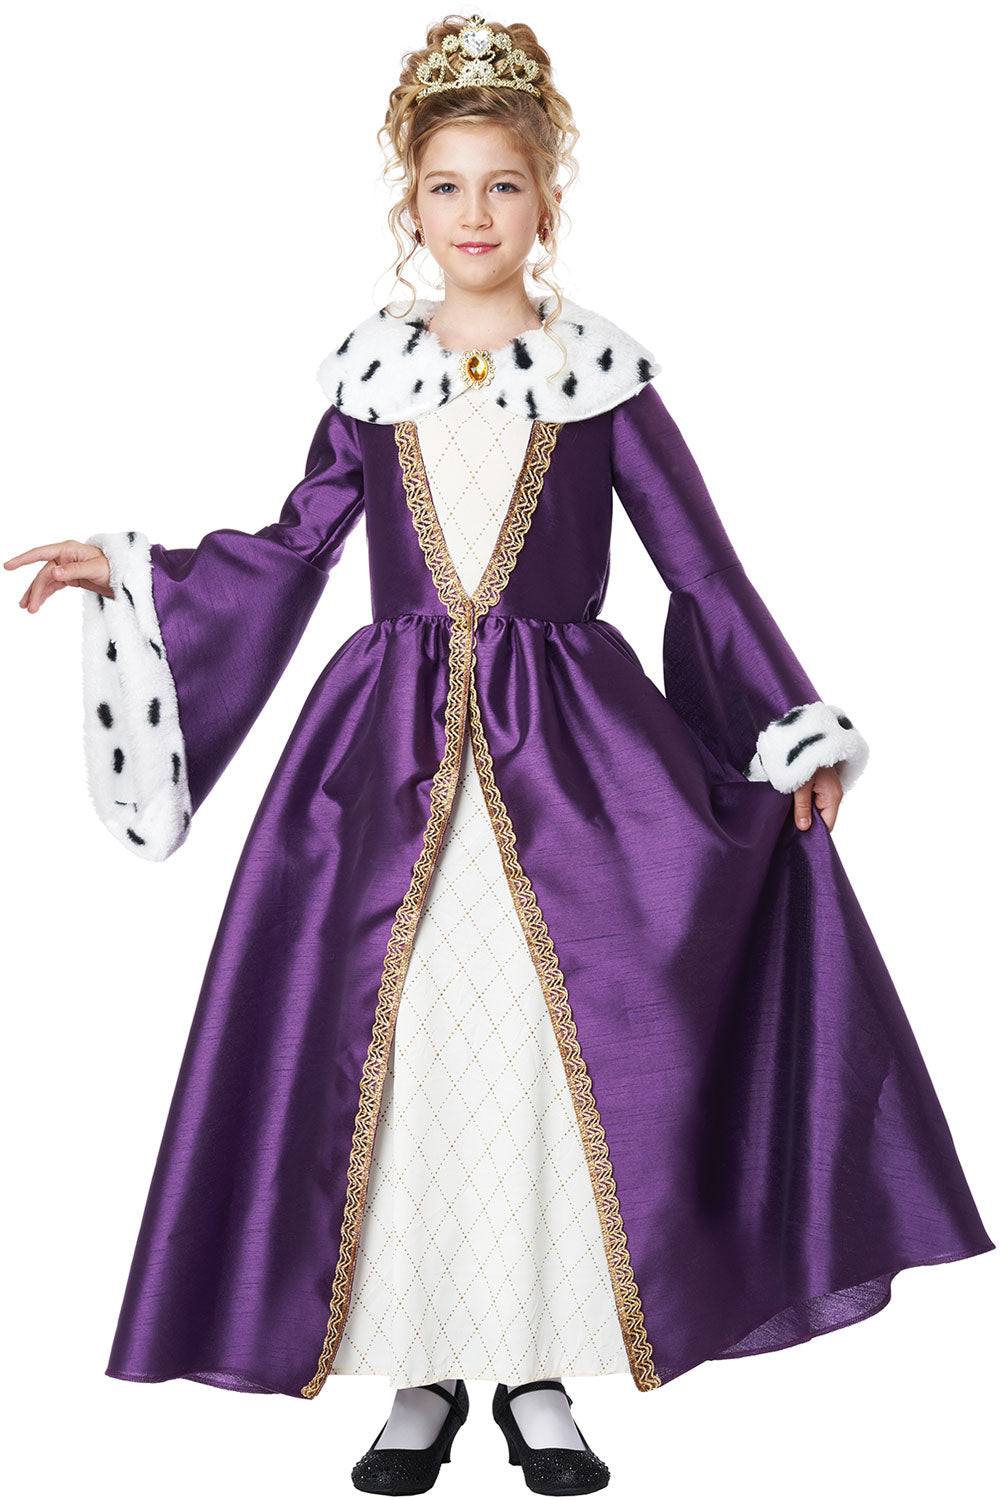 Queen For A Day / Child California Costume 3021-135